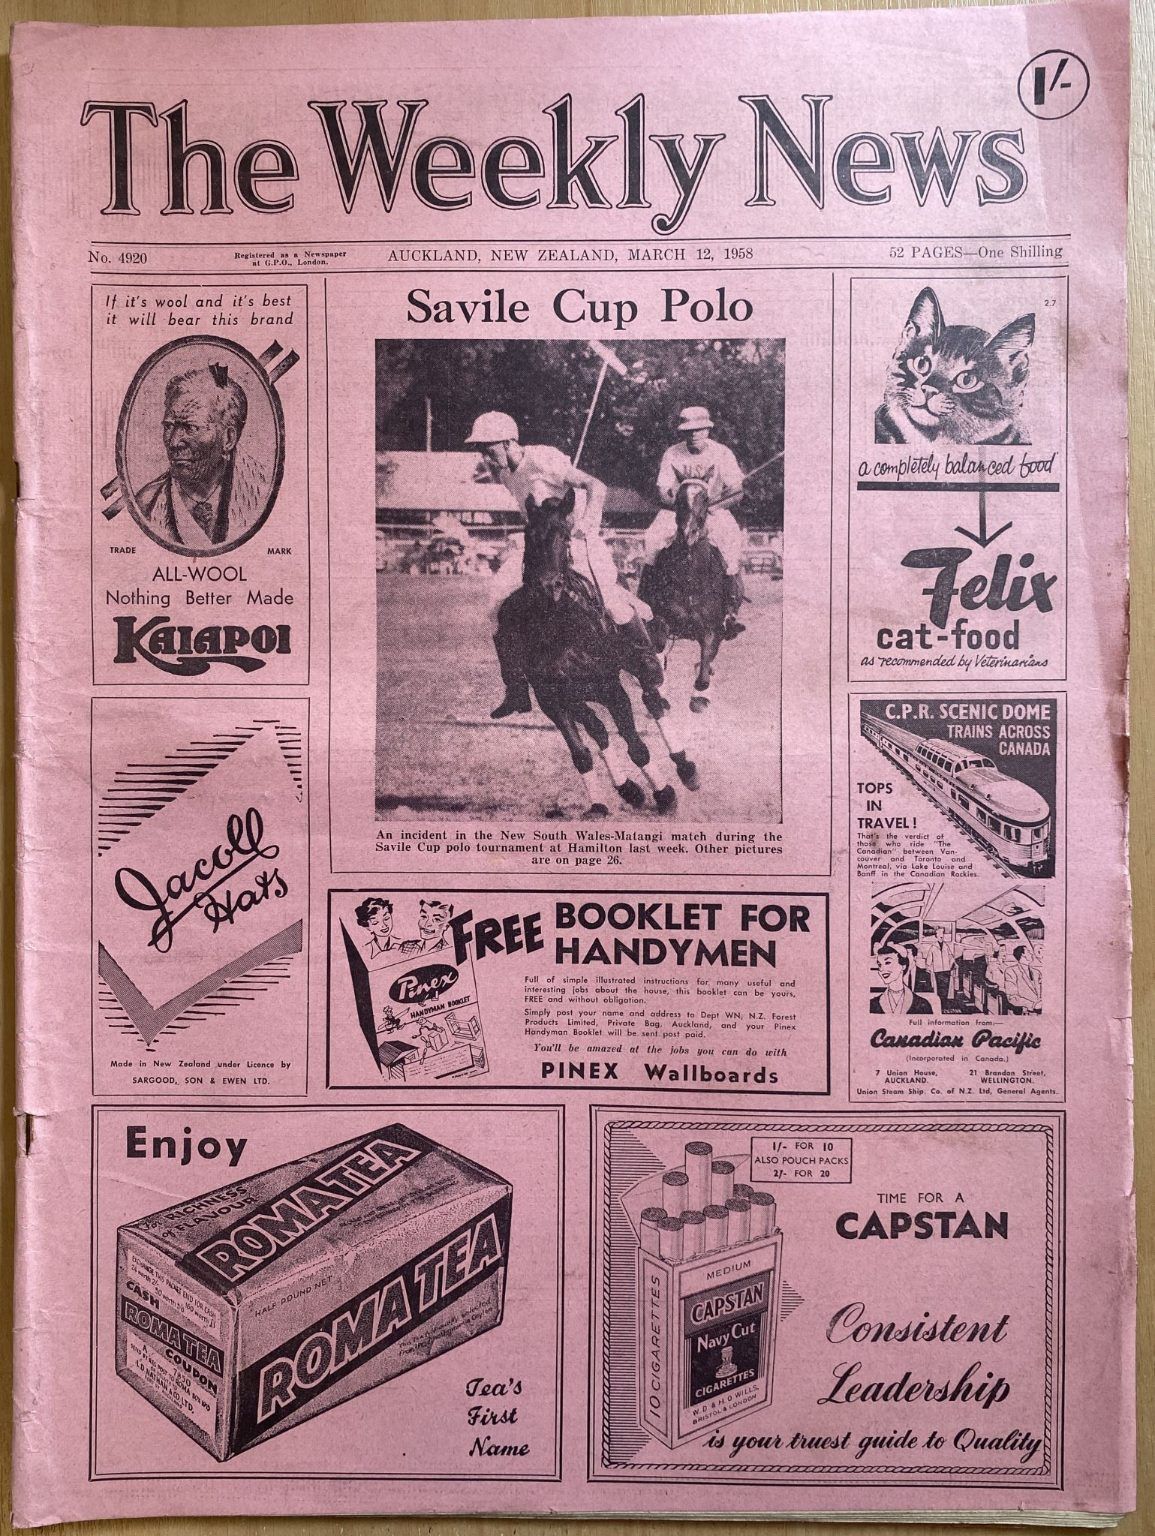 OLD NEWSPAPER: The Weekly News, No. 4920, 12 March 1958